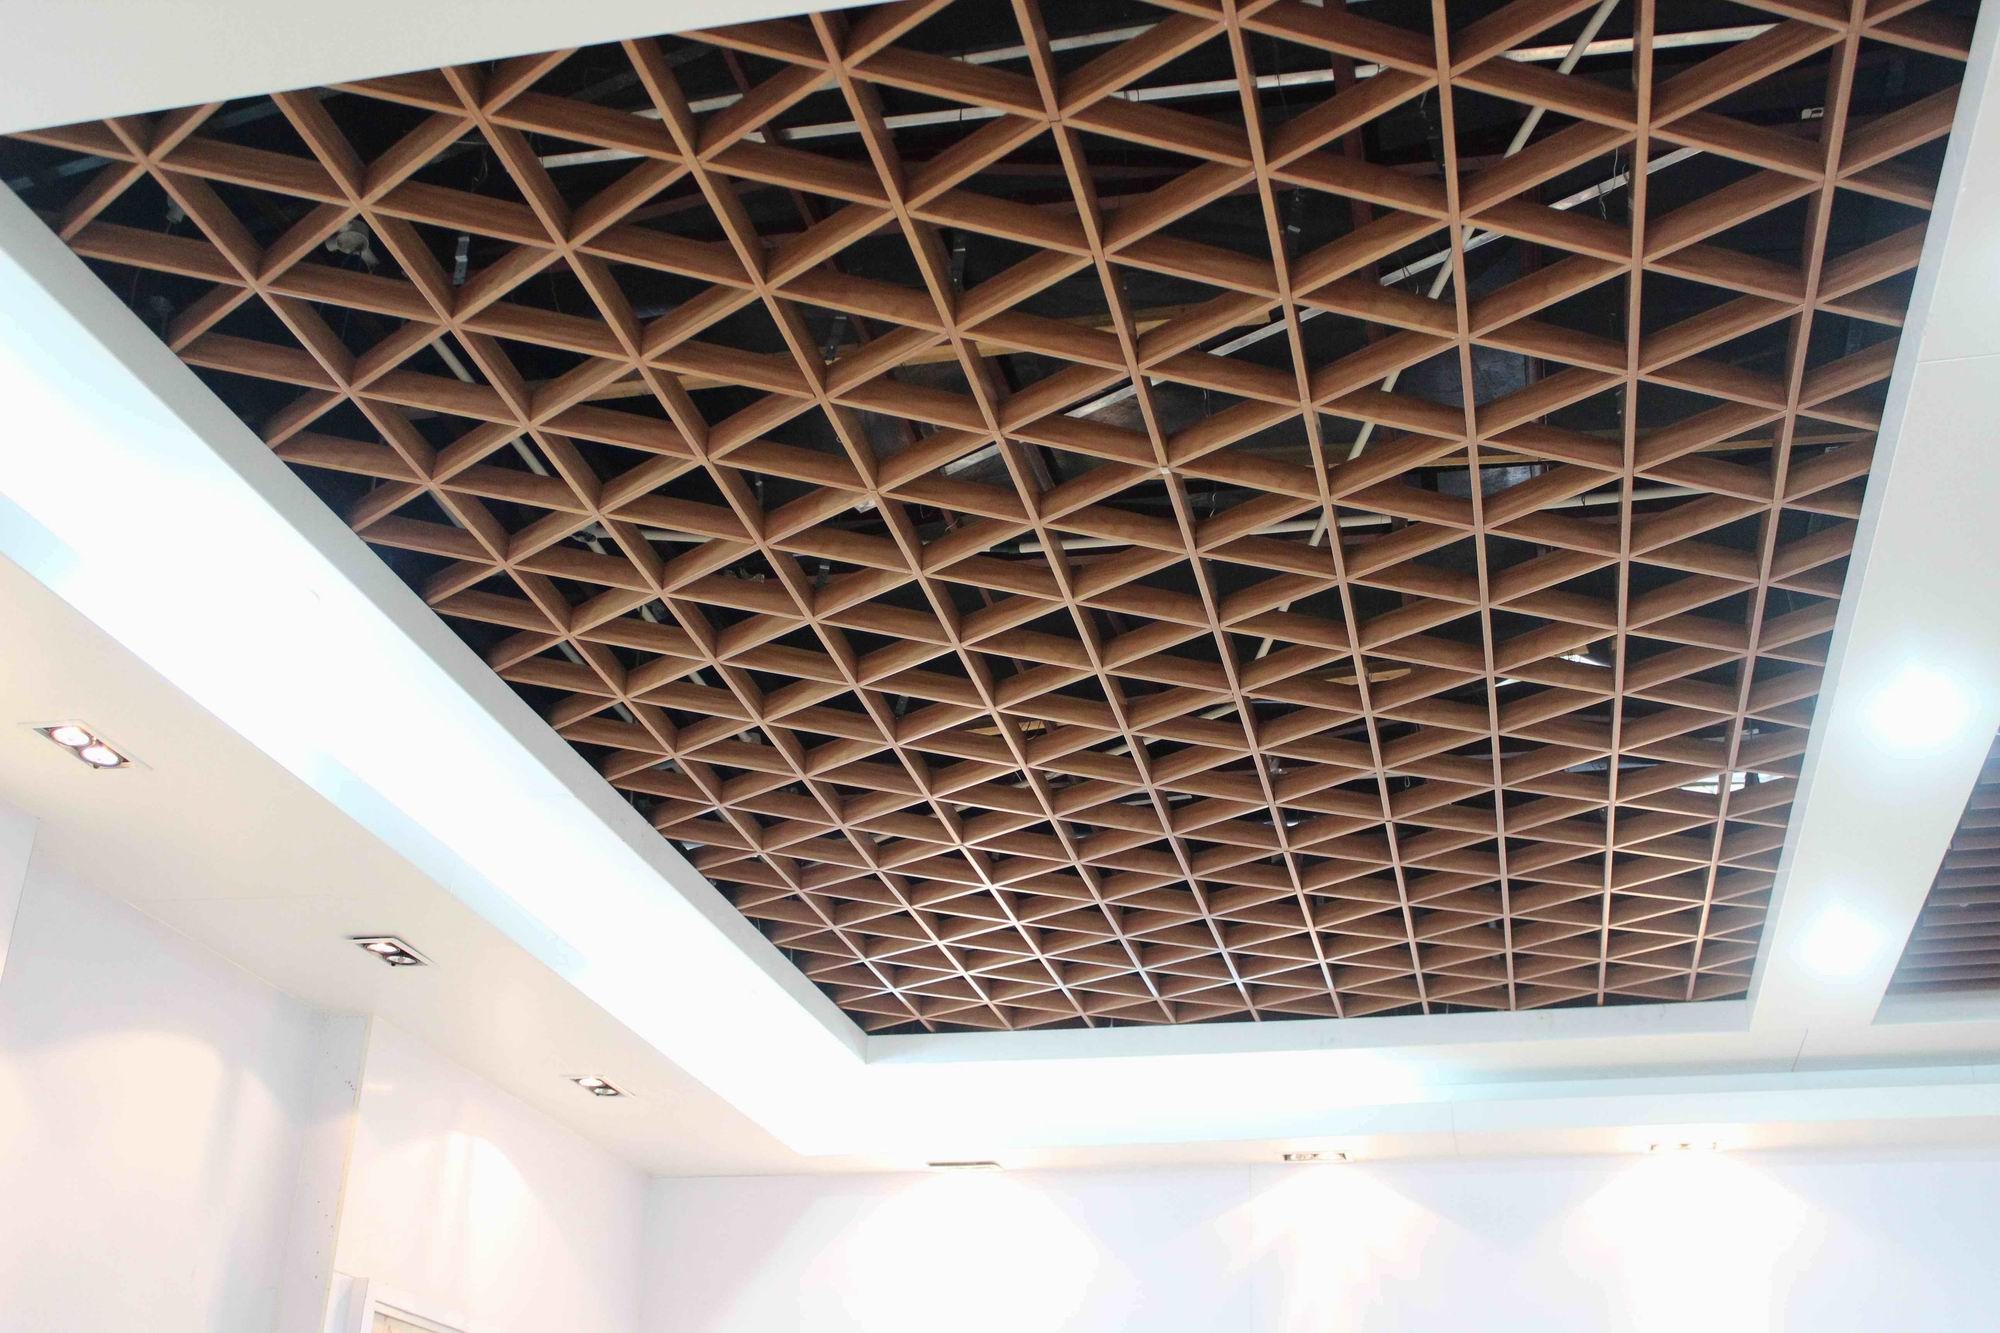 Mdf Open Cell Ceiling Tiles Mdf Open Cell Ceiling Tiles 5 playful wavy 3d panels that make drop ceilings fun ceilings 2000 X 1333